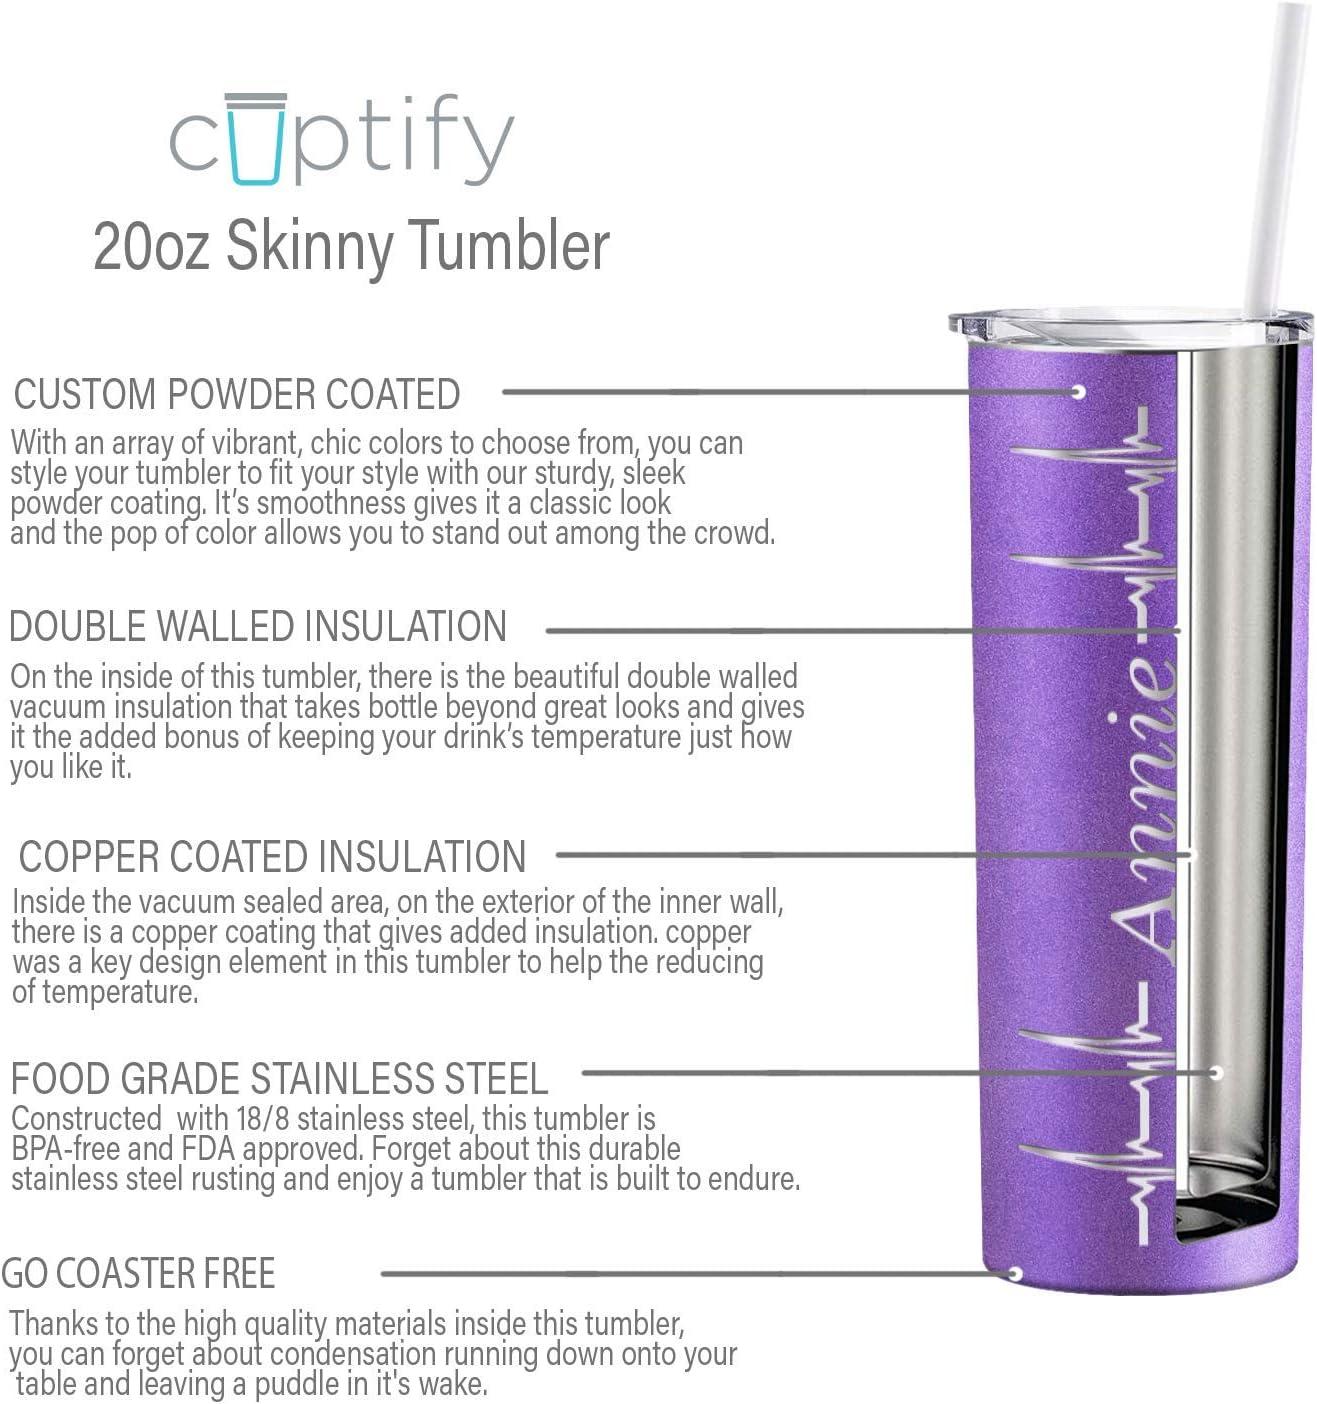 Personalized Glitter Stainless Steel Skinny Tumbler with Straw